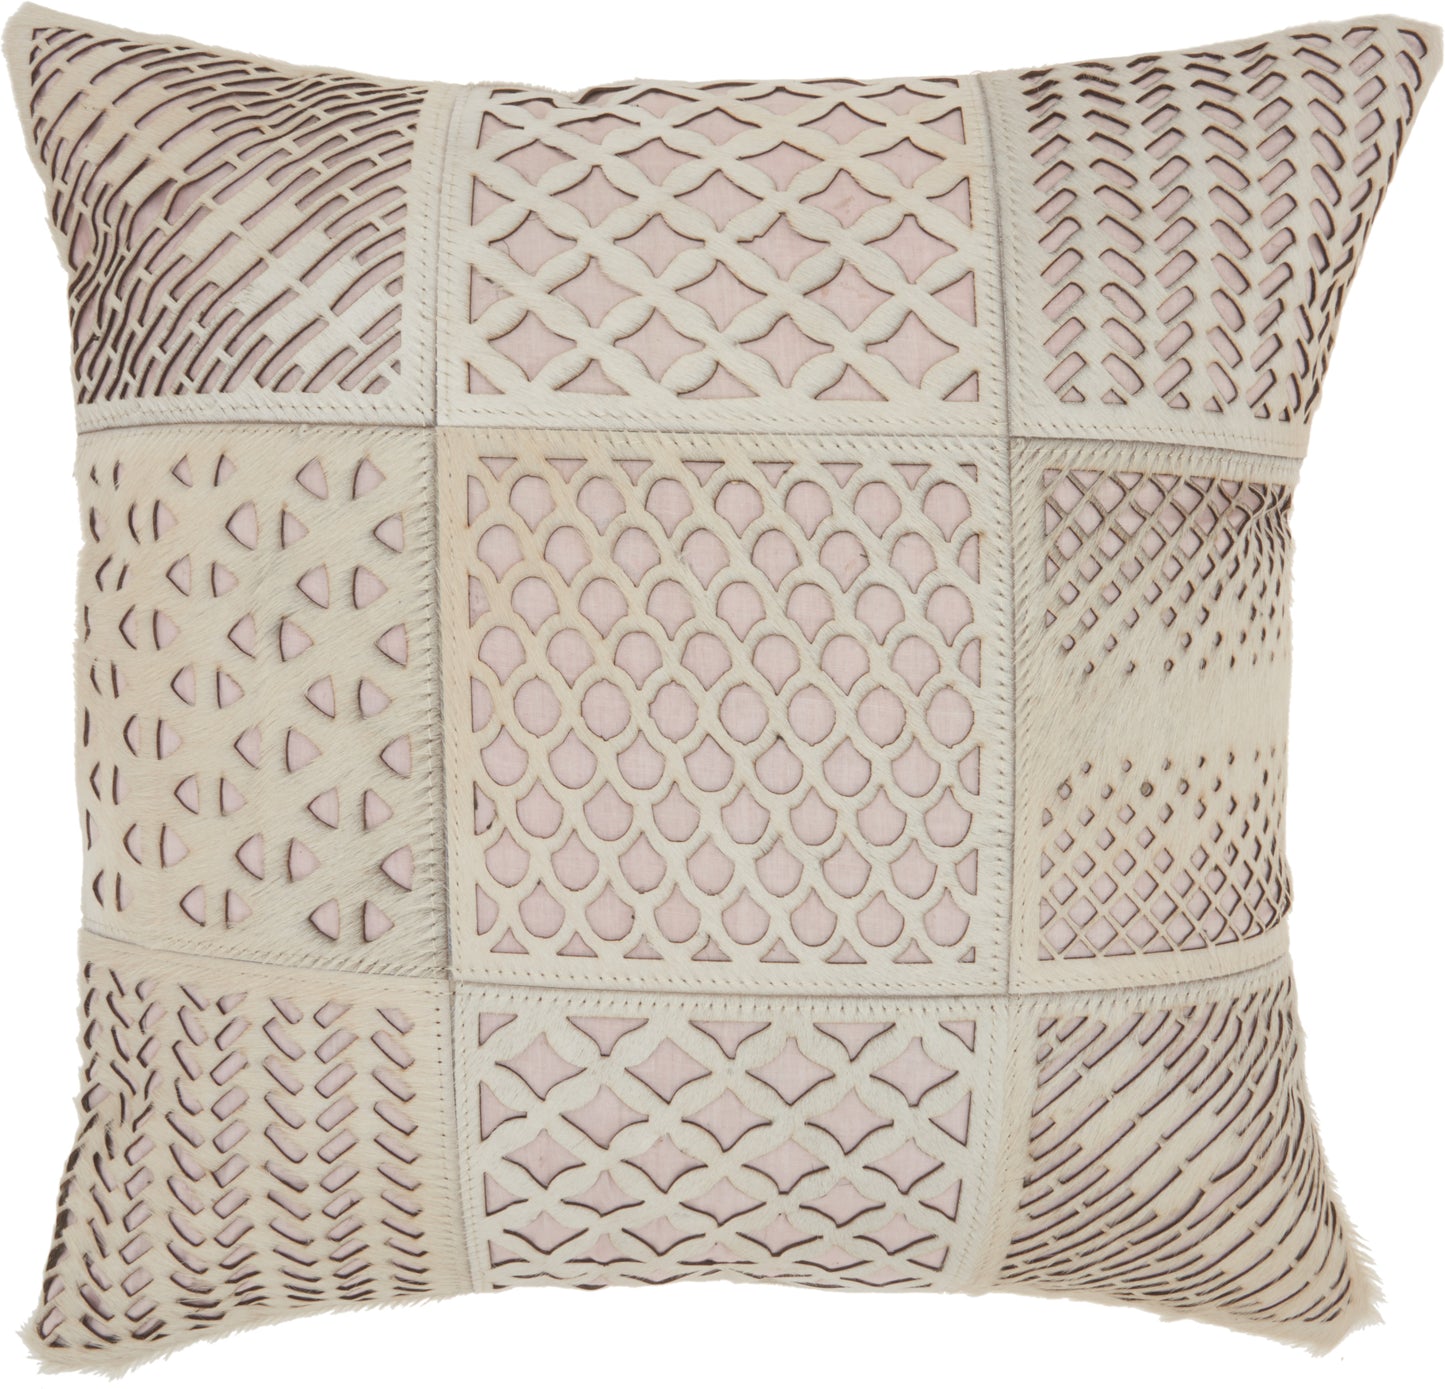 Natural Leather Hide S2432 Leather Laser Cut Tiles Throw Pillow From Mina Victory By Nourison Rugs